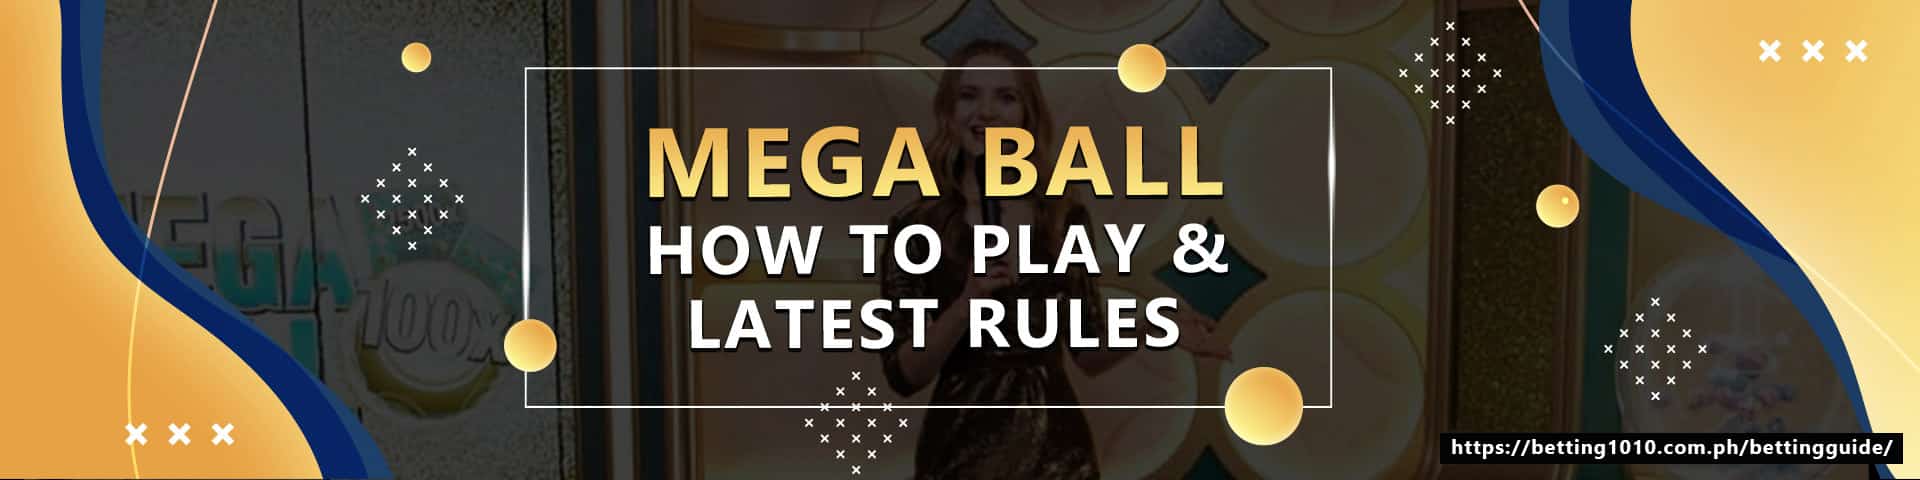 MEGA BALL-HOW TO PLAY & LATEST RULES